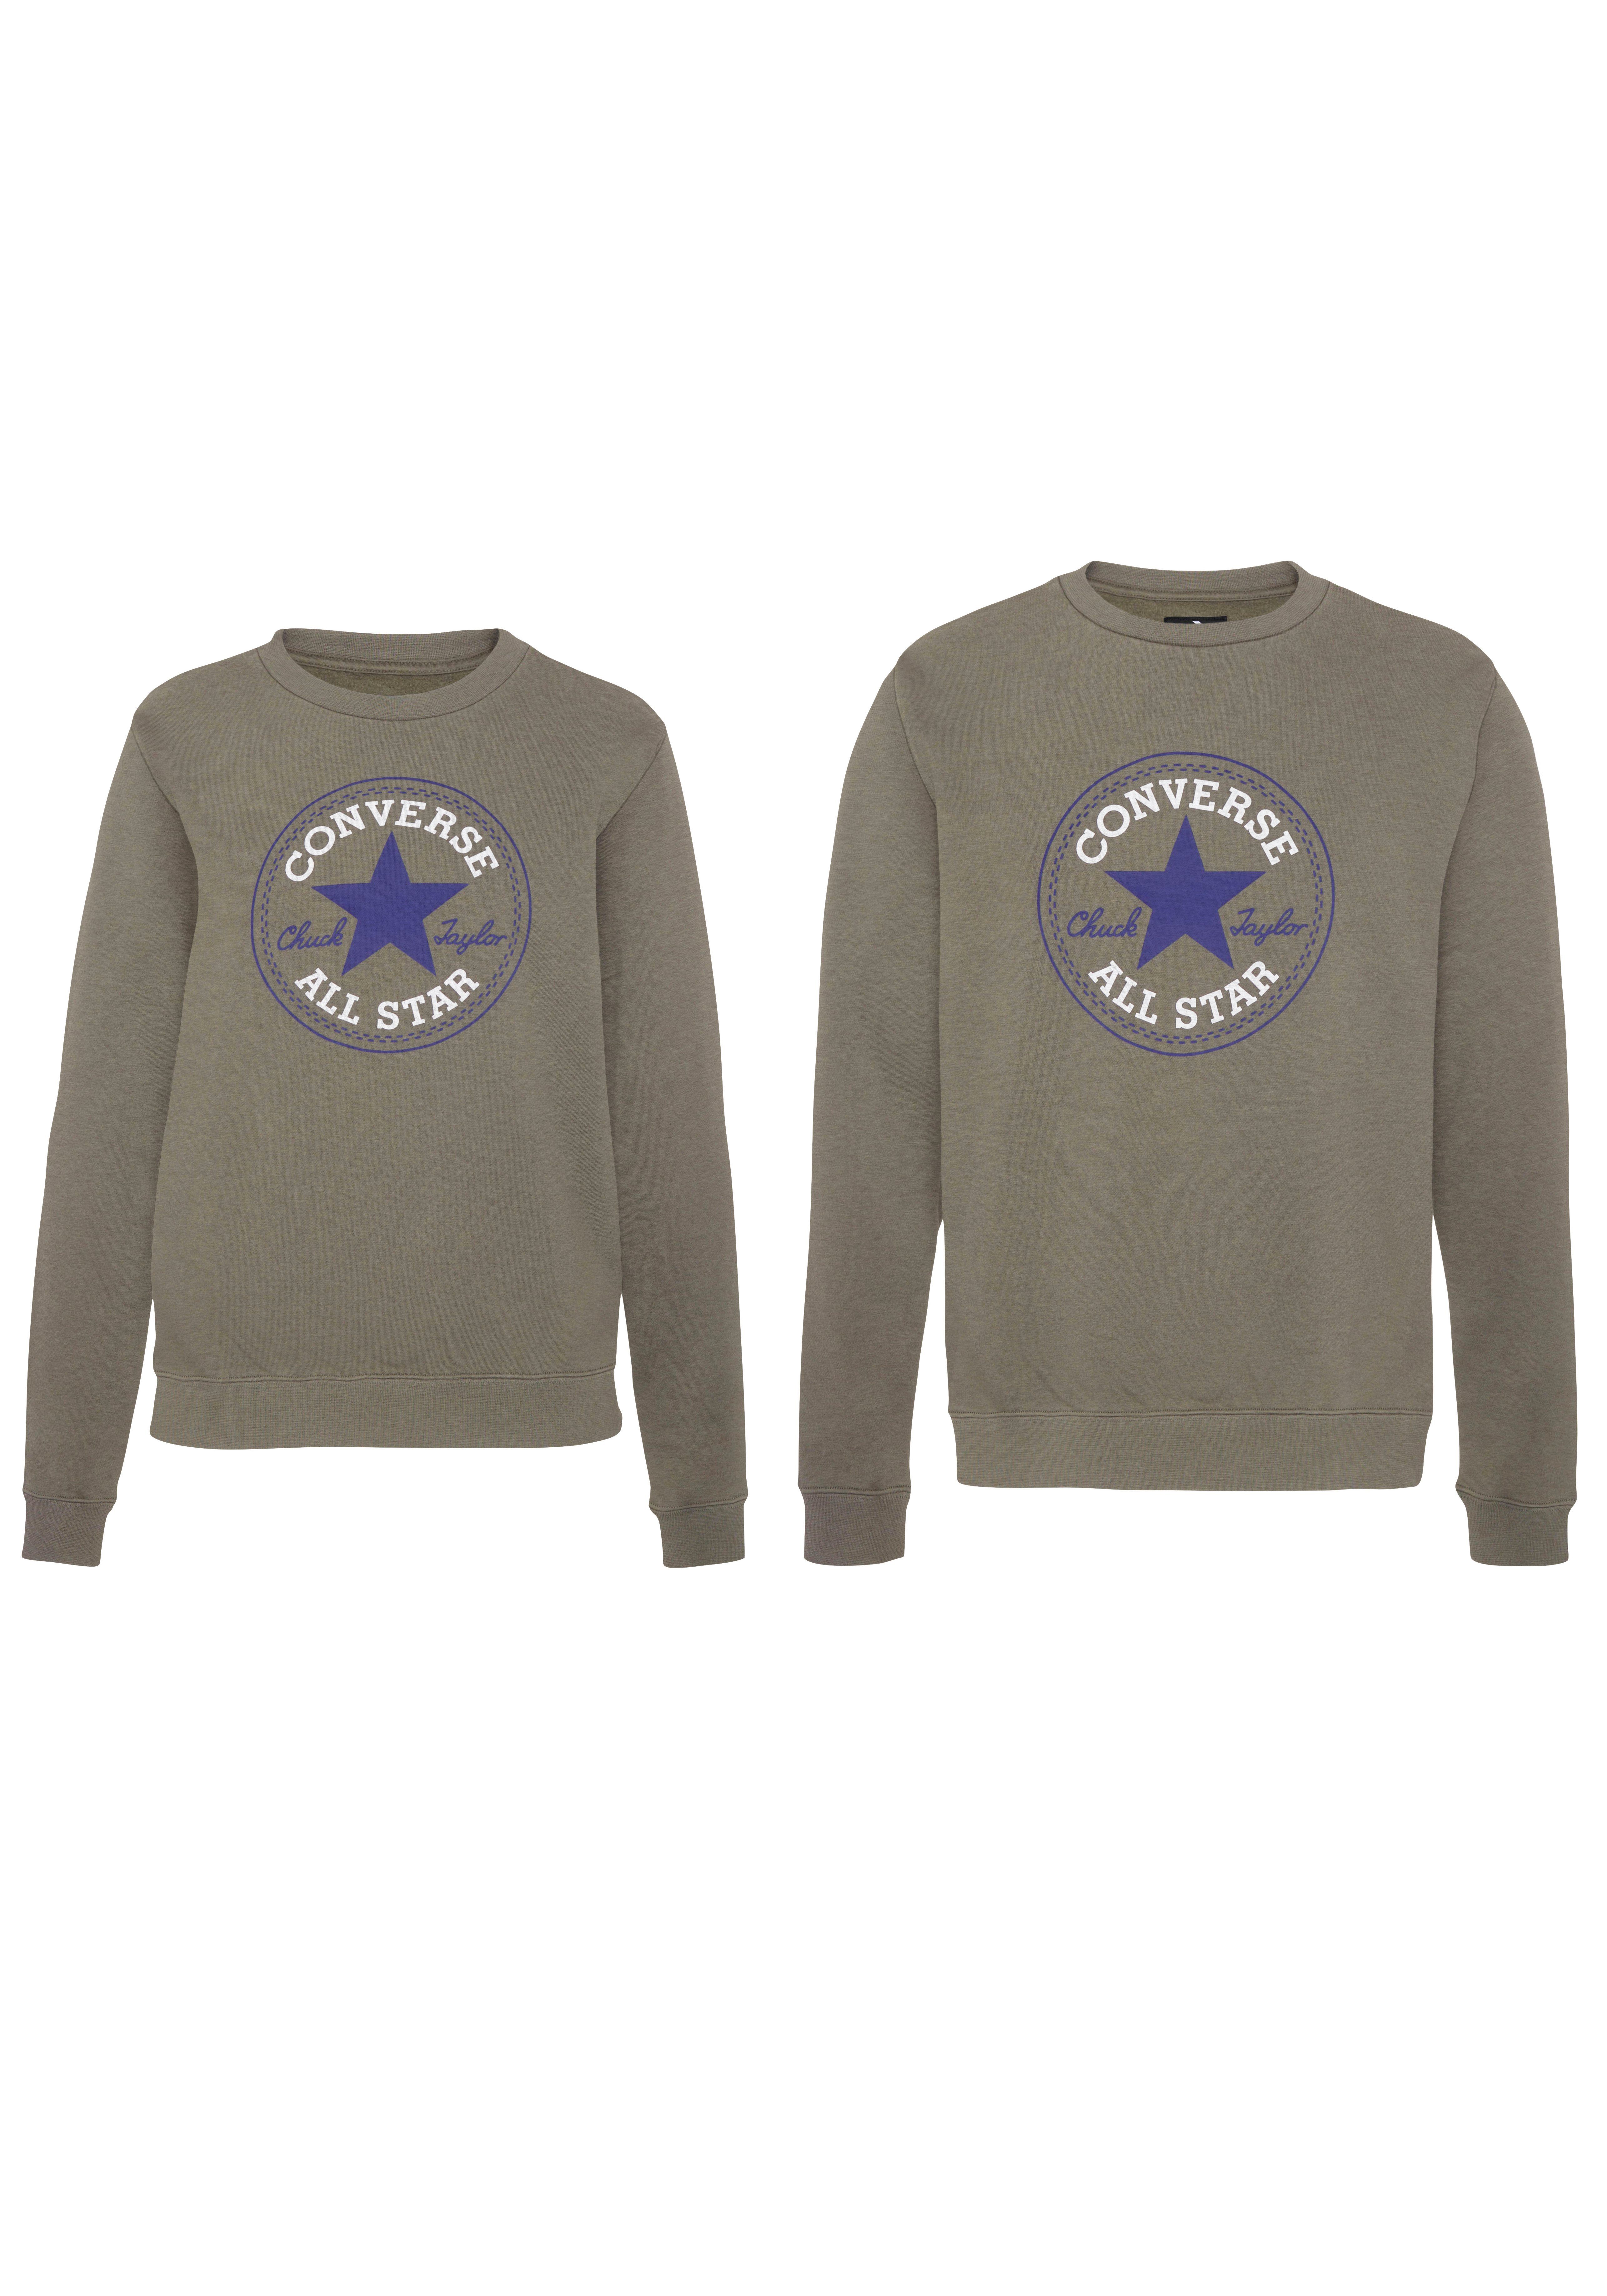 olive PATCH STAR UNISEX Converse BACK BRUSHED Sweatshirt ALL